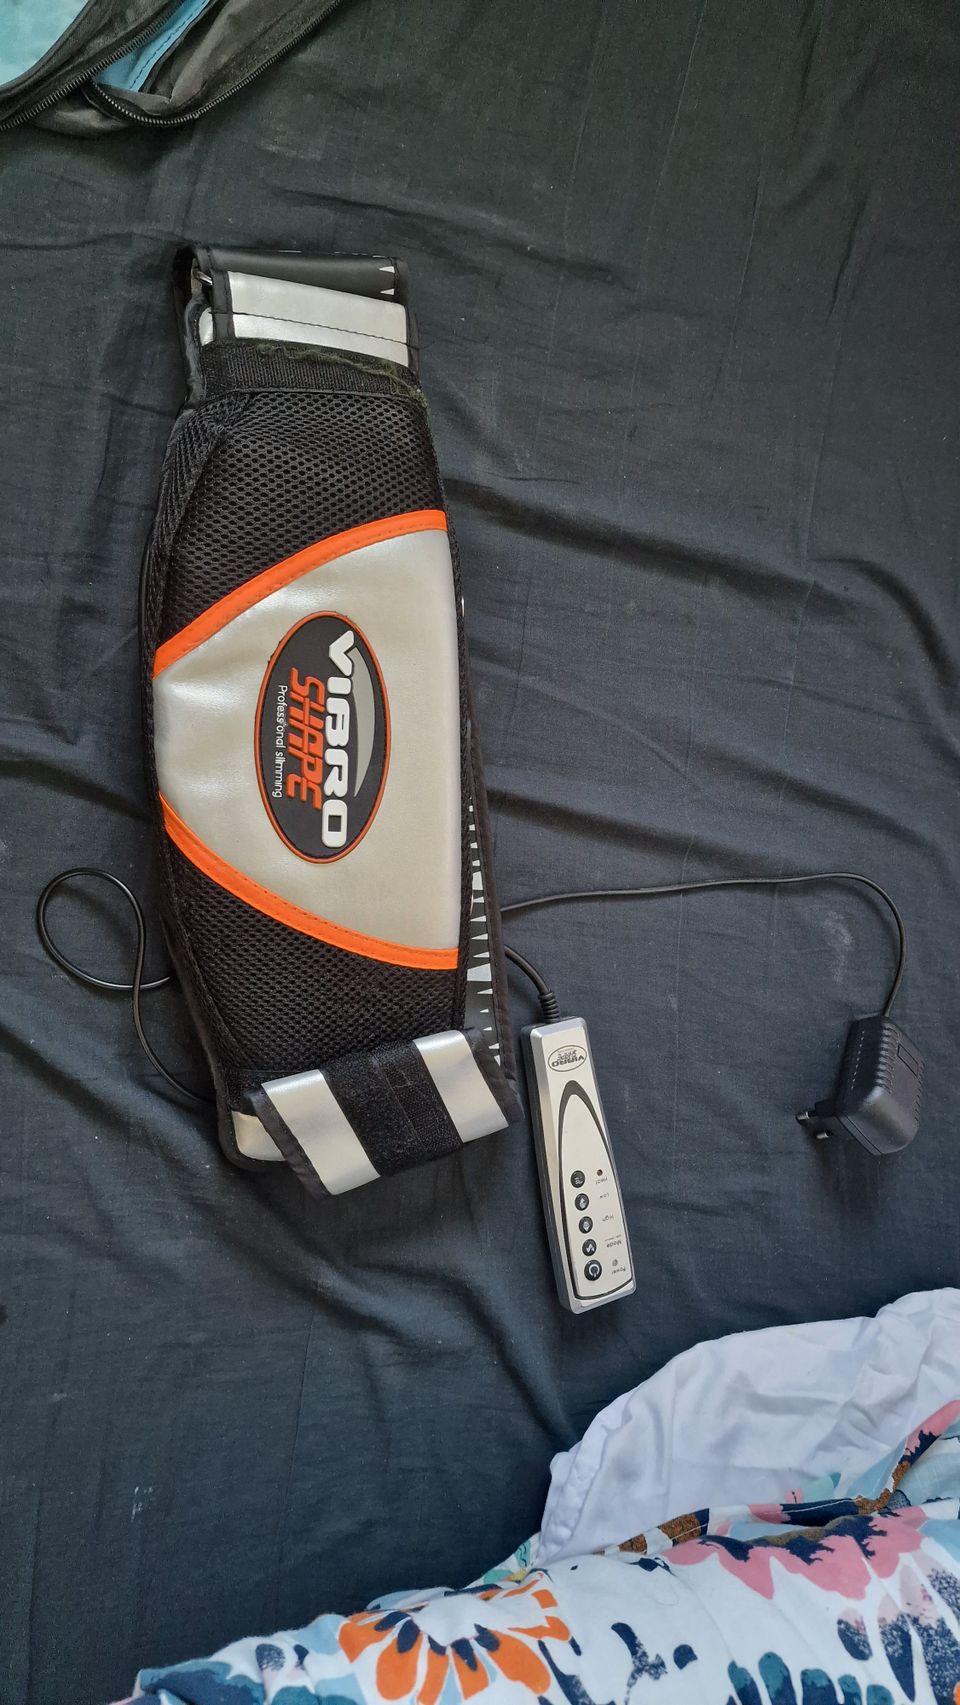 Slimming belt vipro with heating